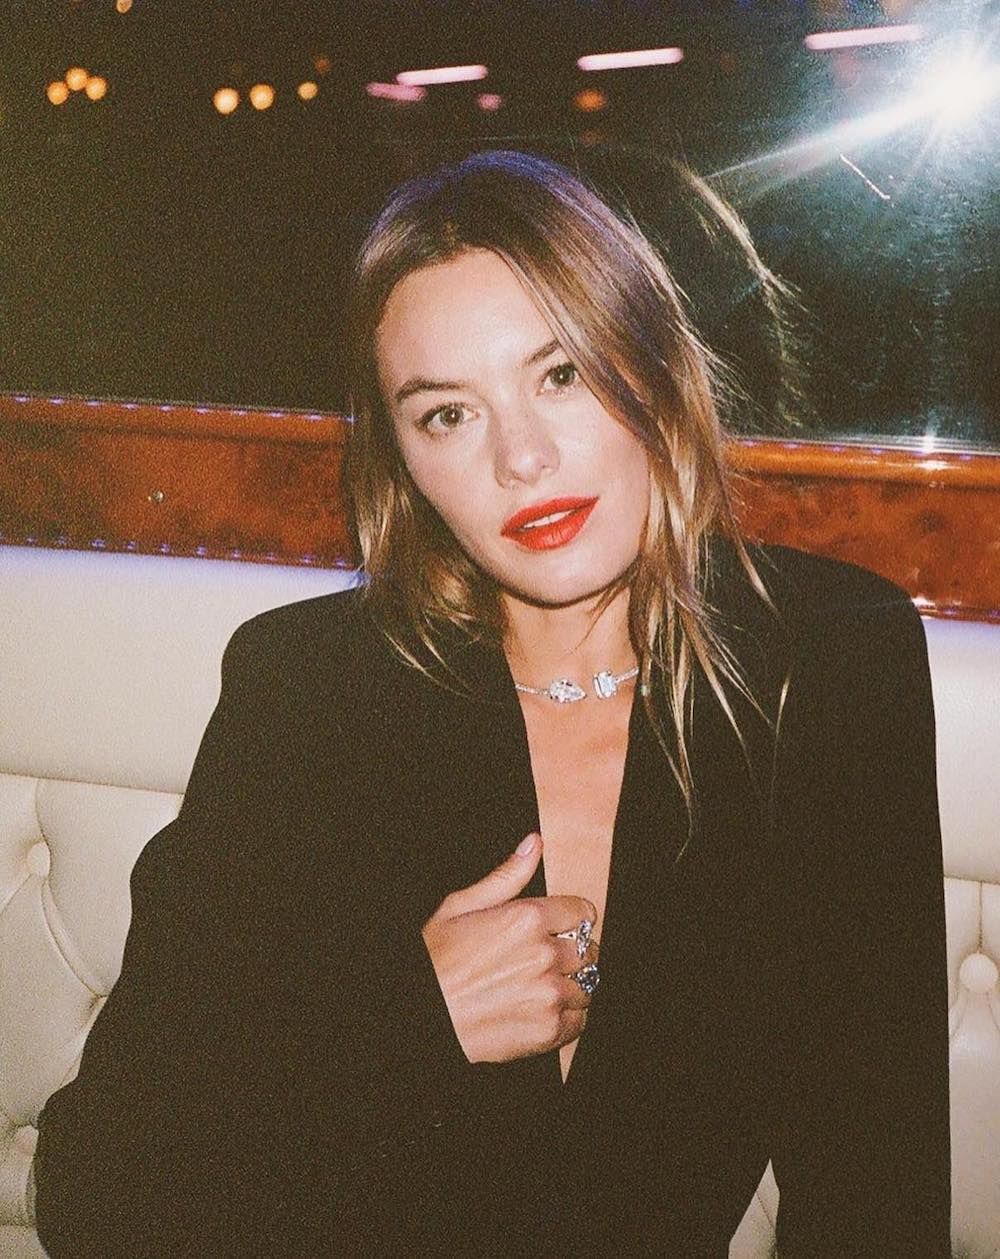 French models - Camille Rowe